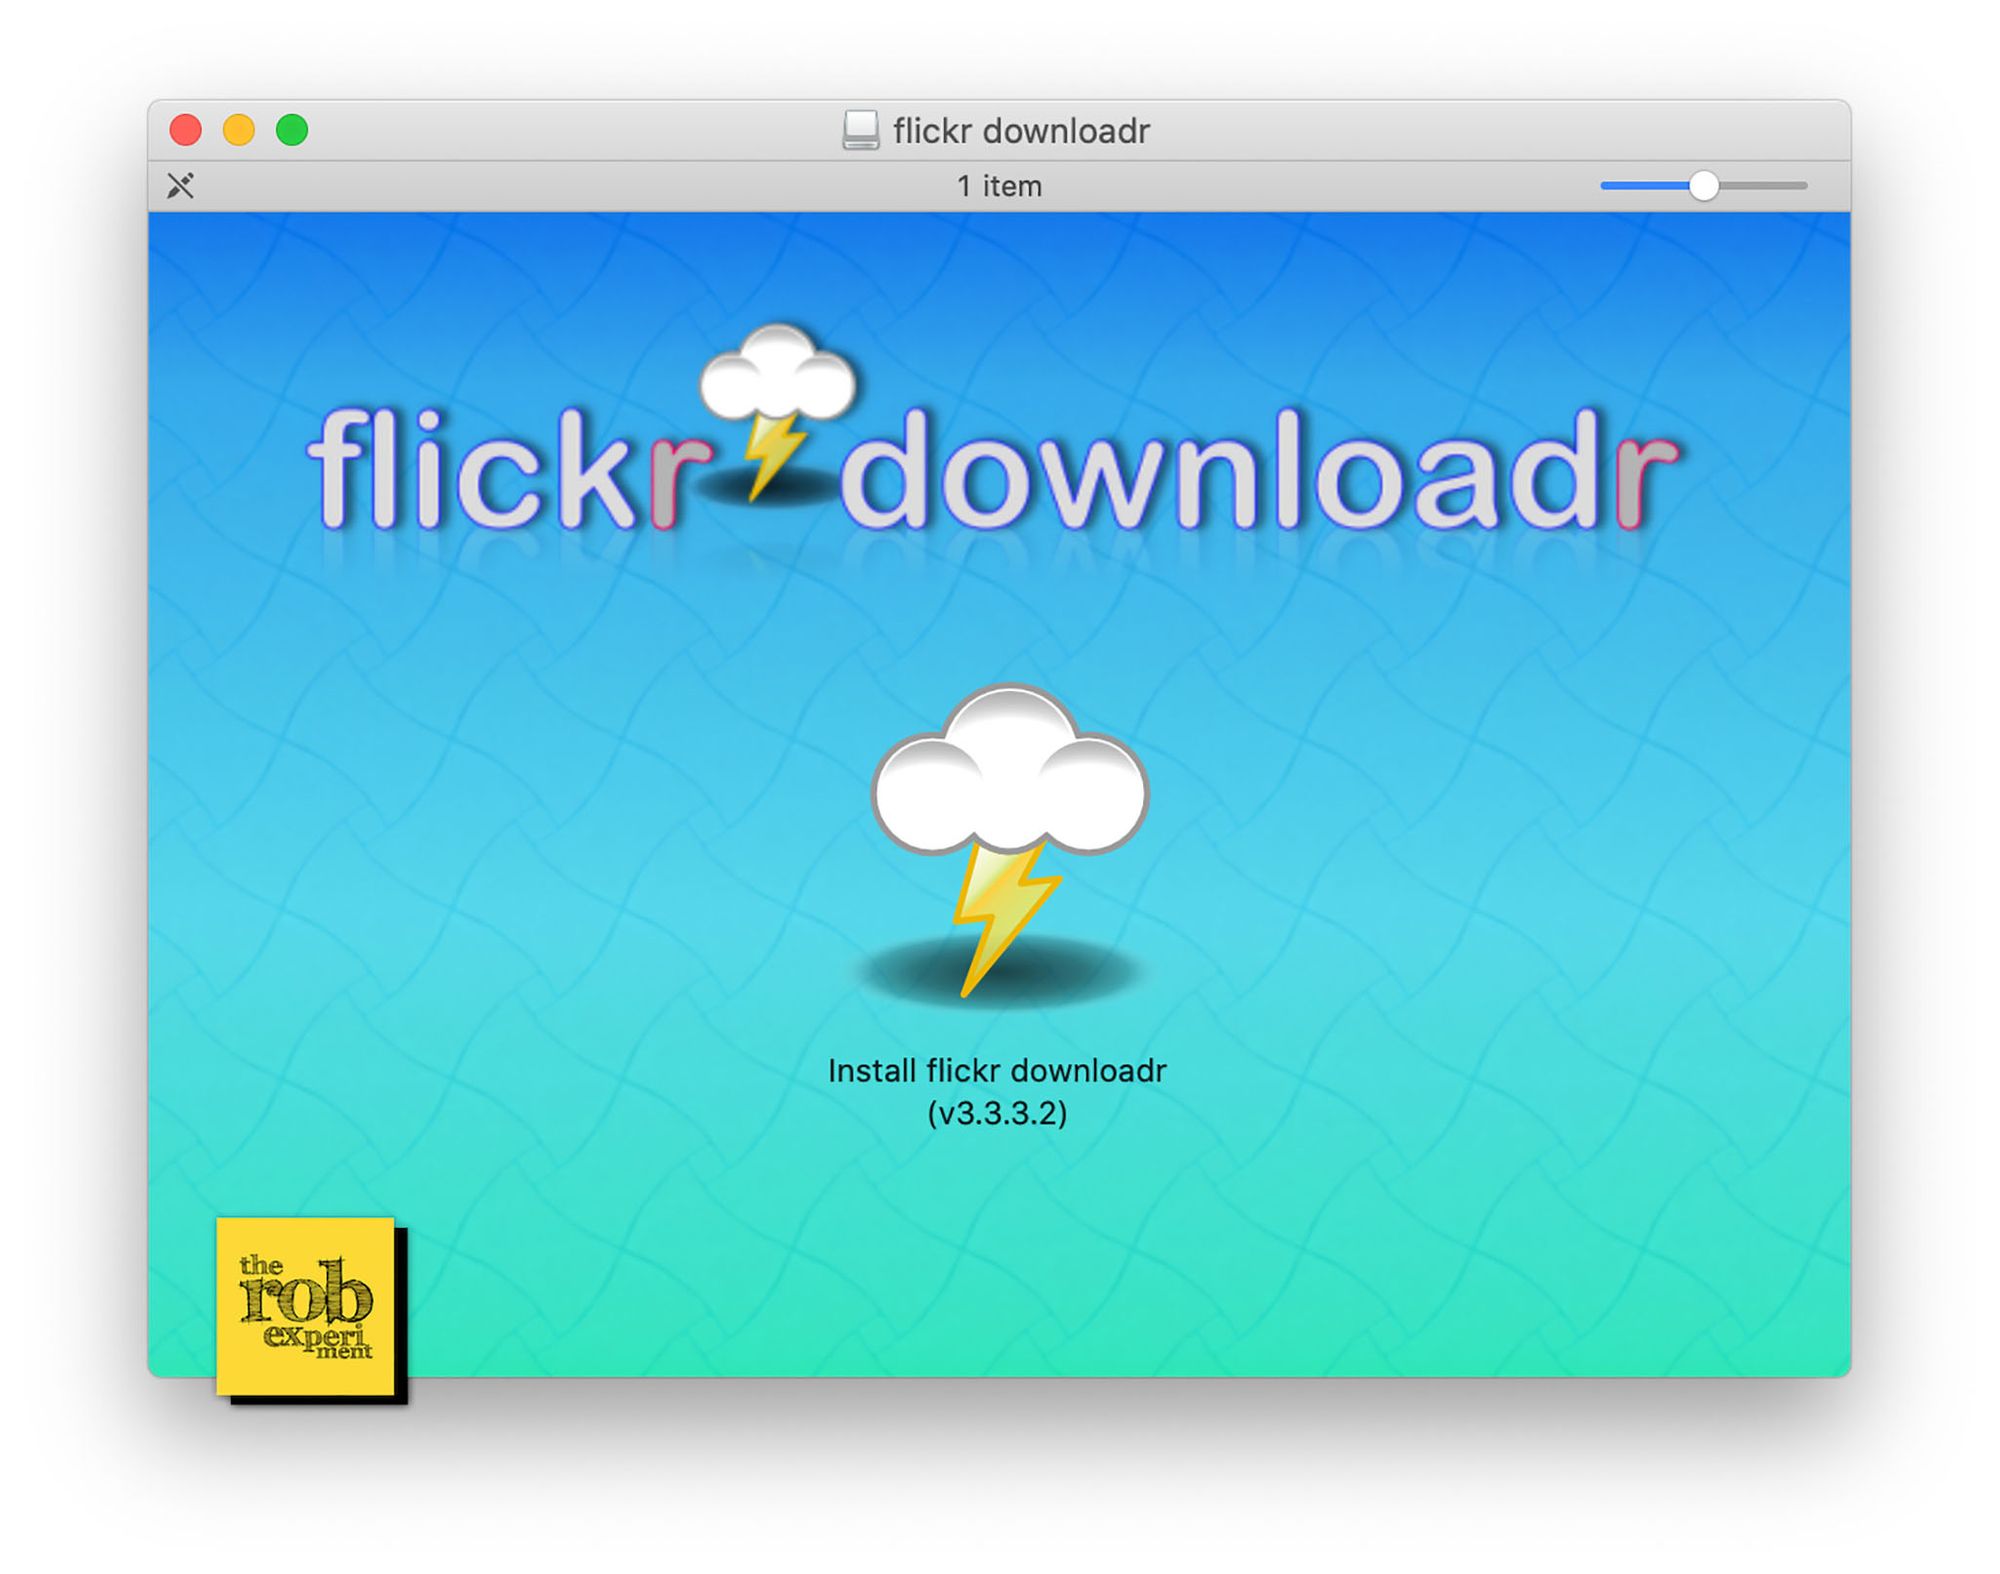 How To Use Flickr Downloadr To Bulk Backup All Your Flickr Albums On A Mac?—Solutions